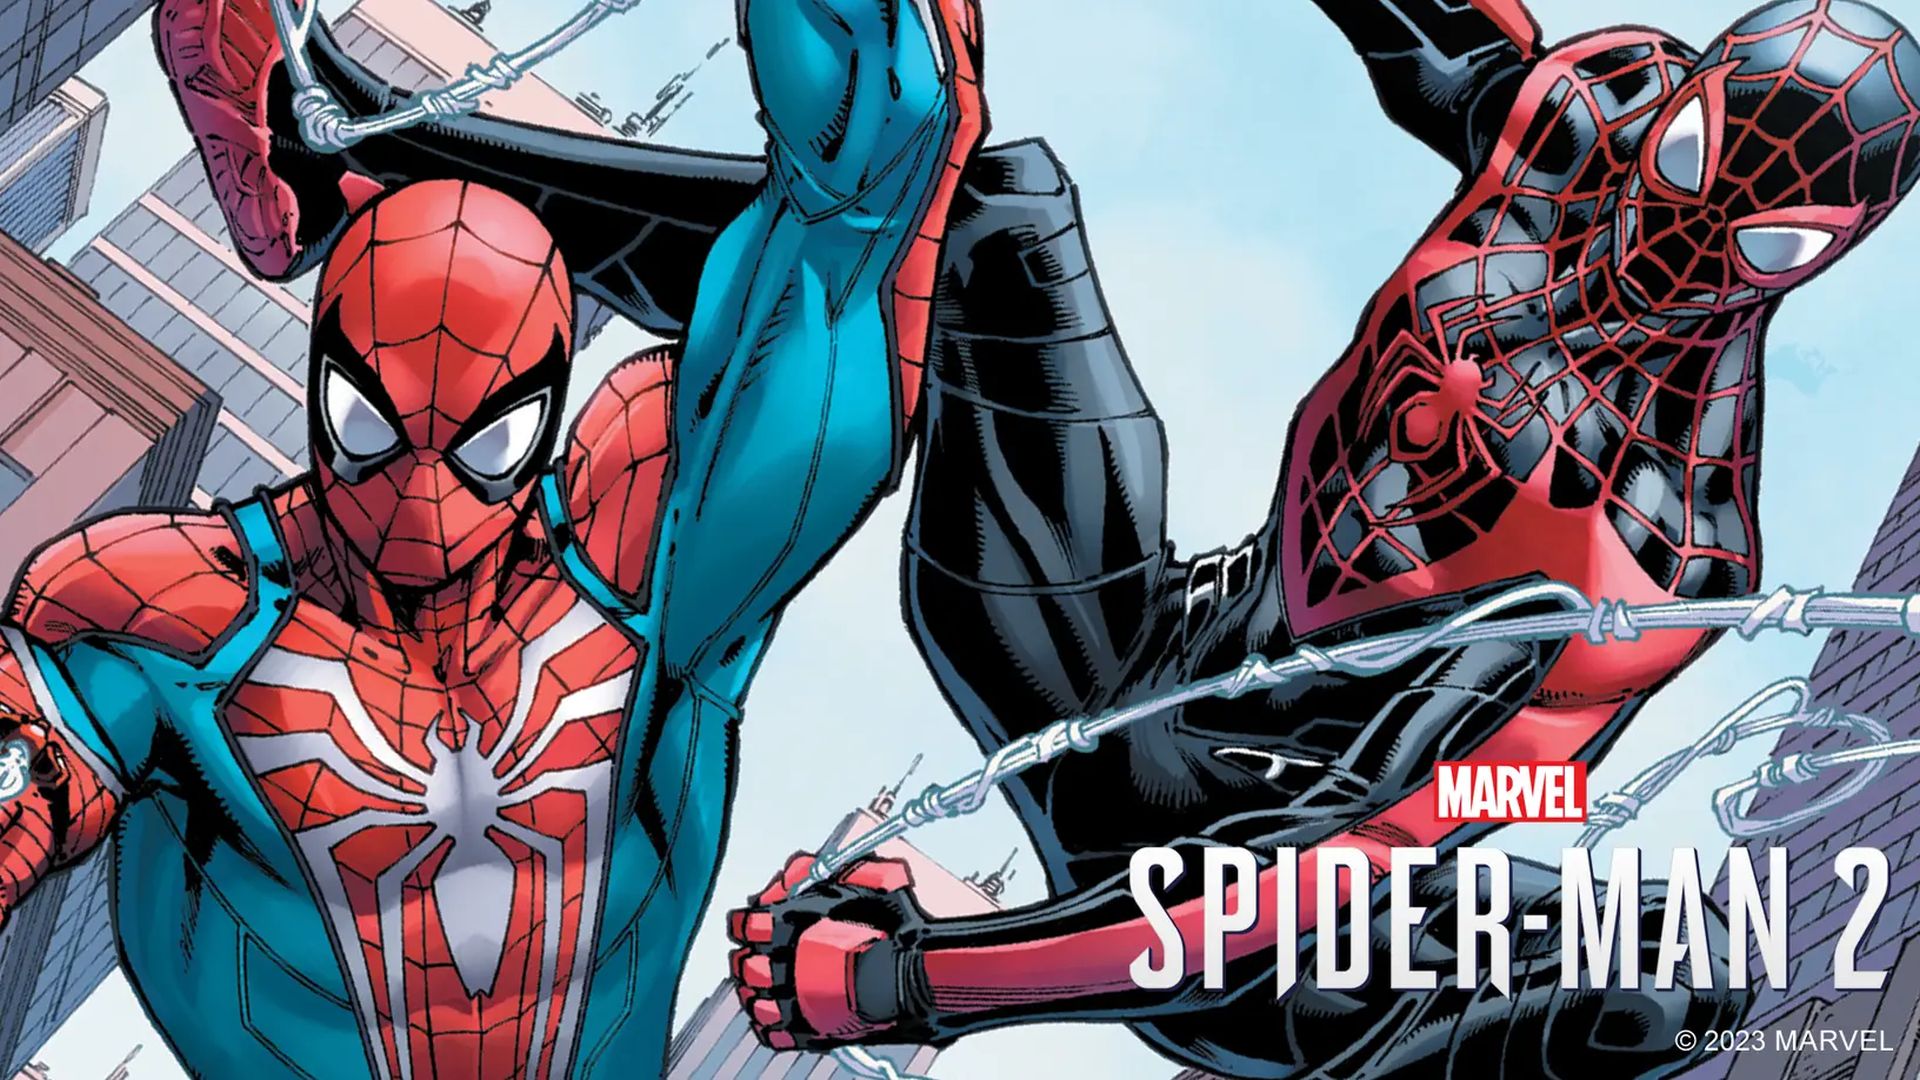 Spider-Man 2 Launching in September with “Massive Publicity” in